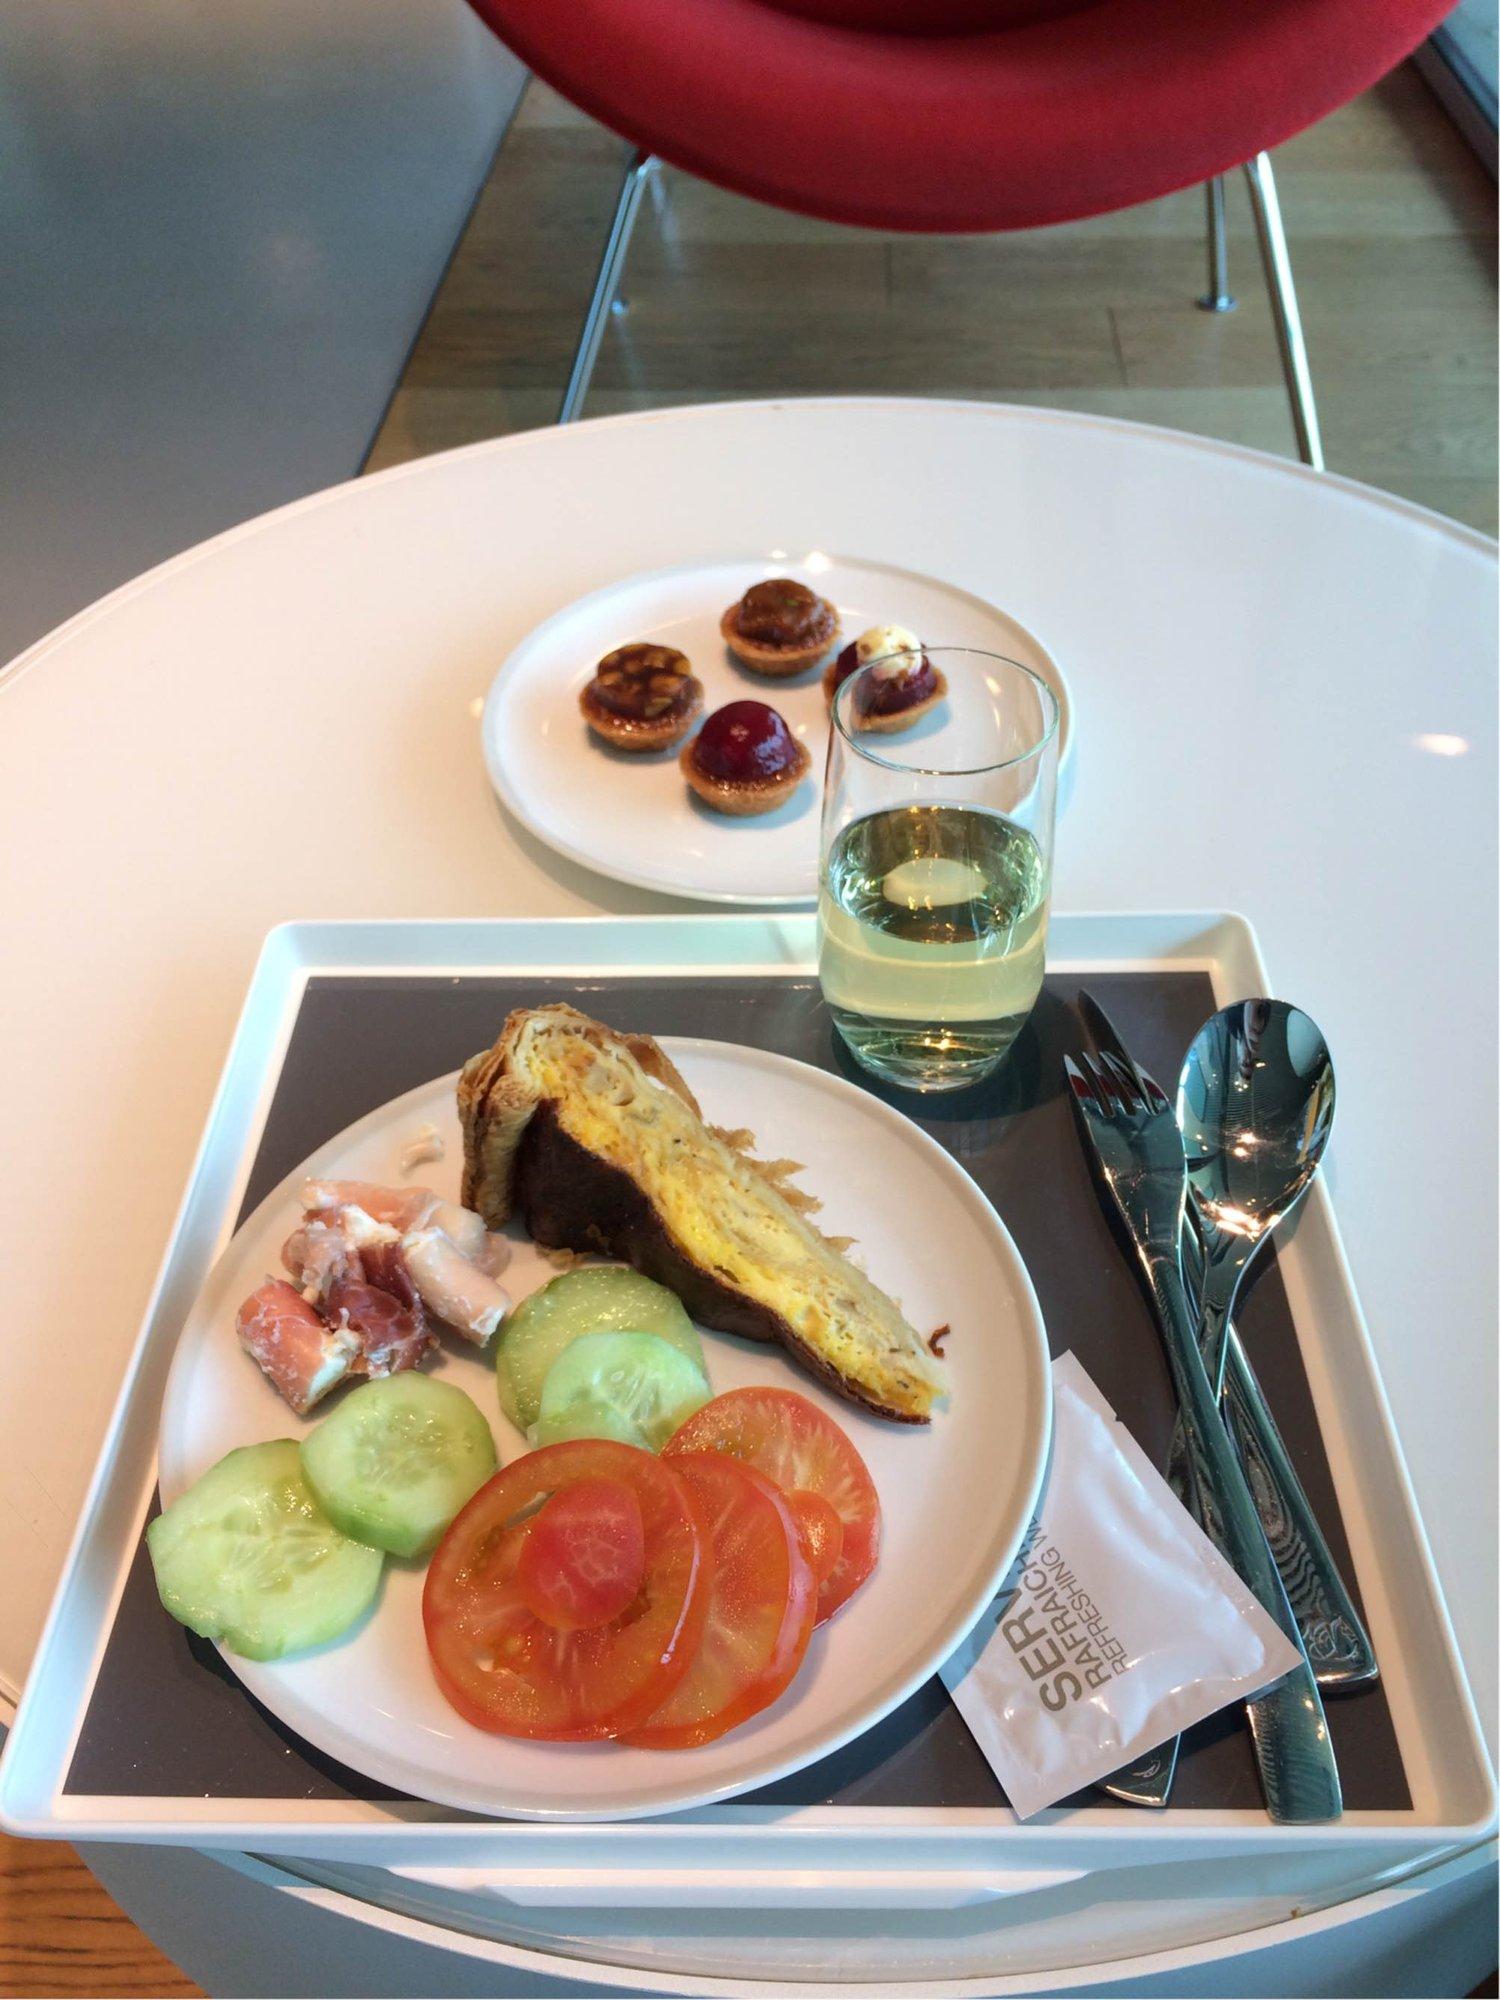 Air France Lounge (Concourse M) image 1 of 17